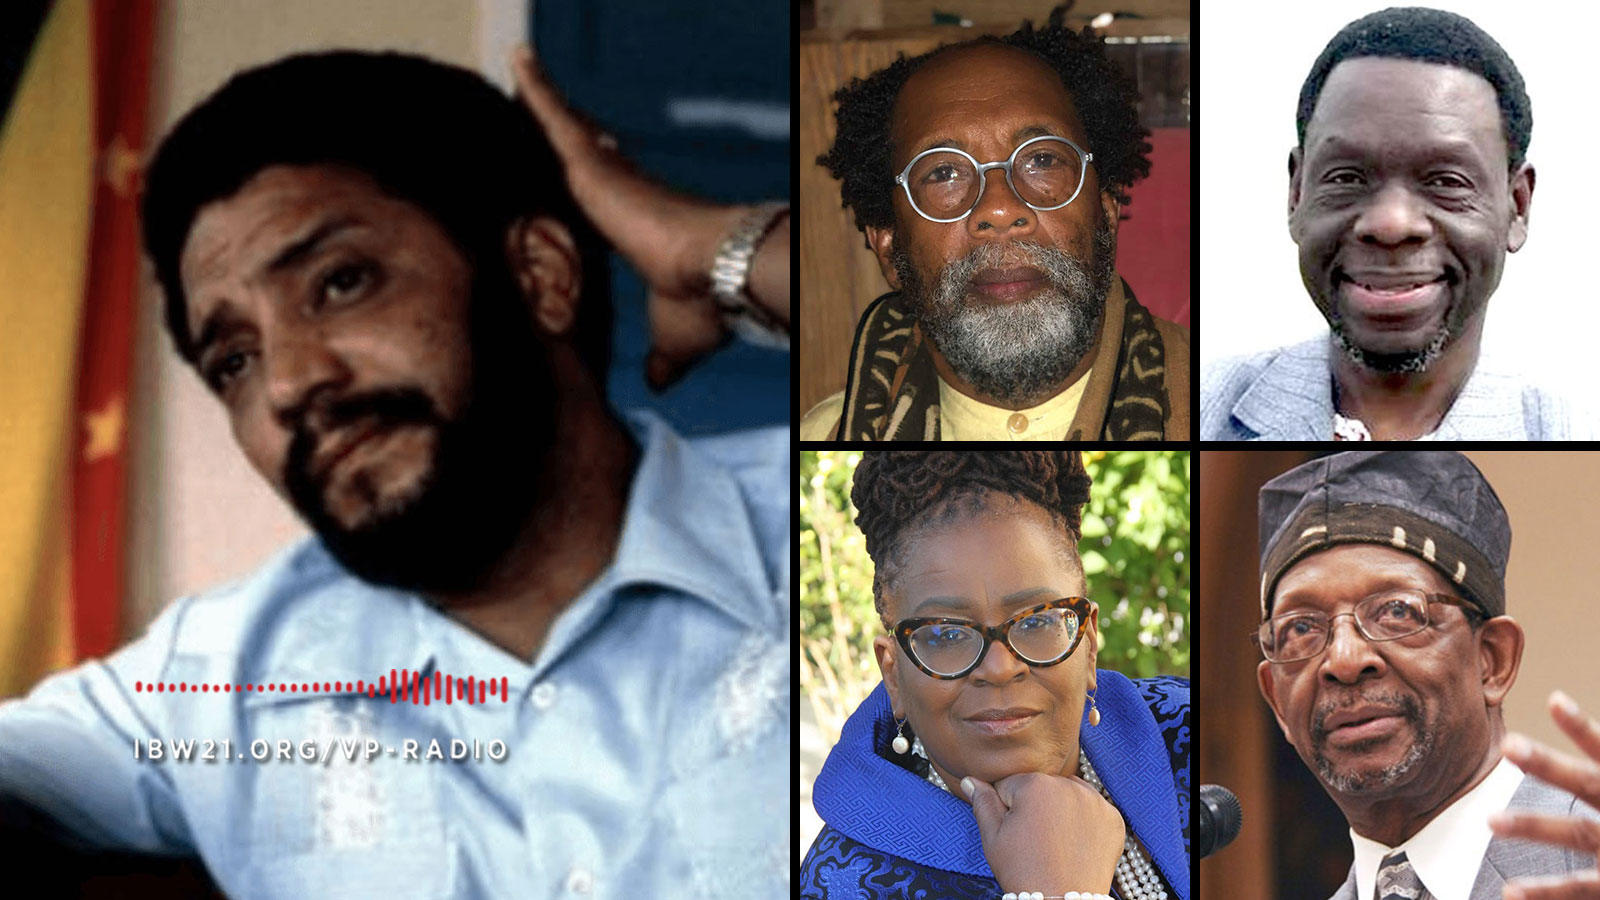 Vantage Point: Honoring the Legacy of Maurice Bishop Part II. Dr. Ron Daniels is joined by special guests James Early, Dr. Claire Nelson and Milton Allimadi.